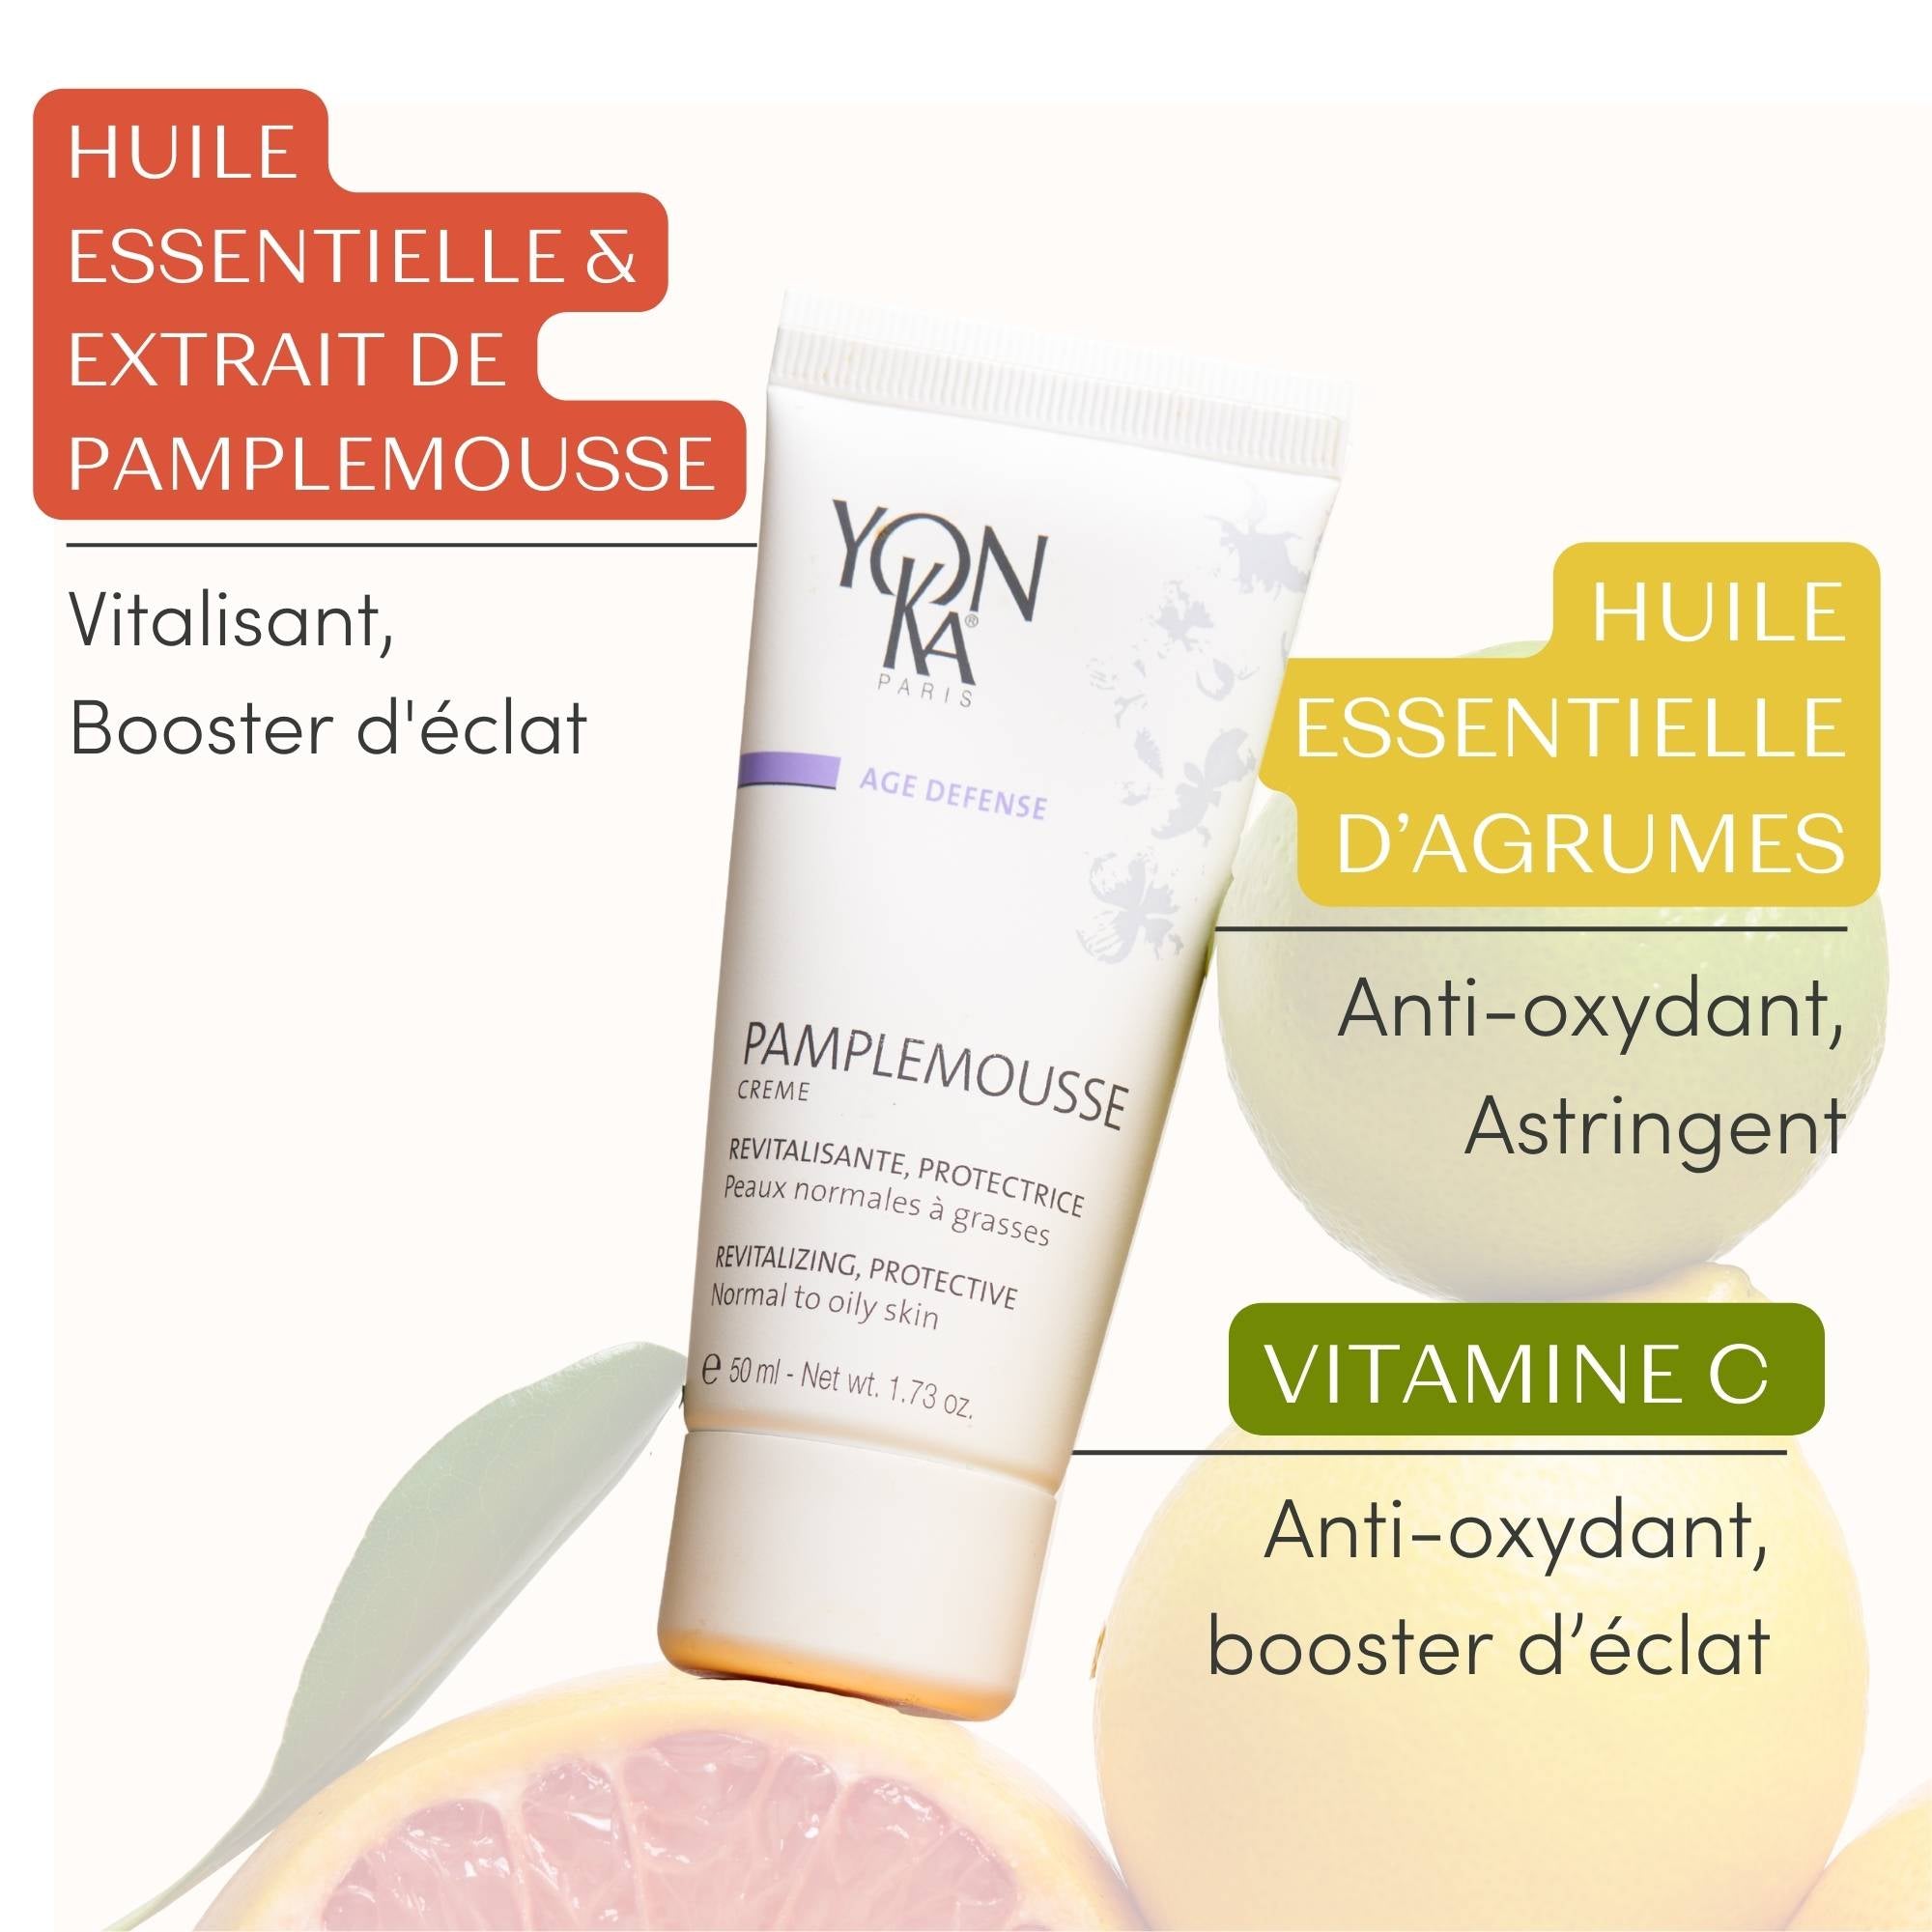 Pamplemousse - Protective Cream - Normal to Oily Skin